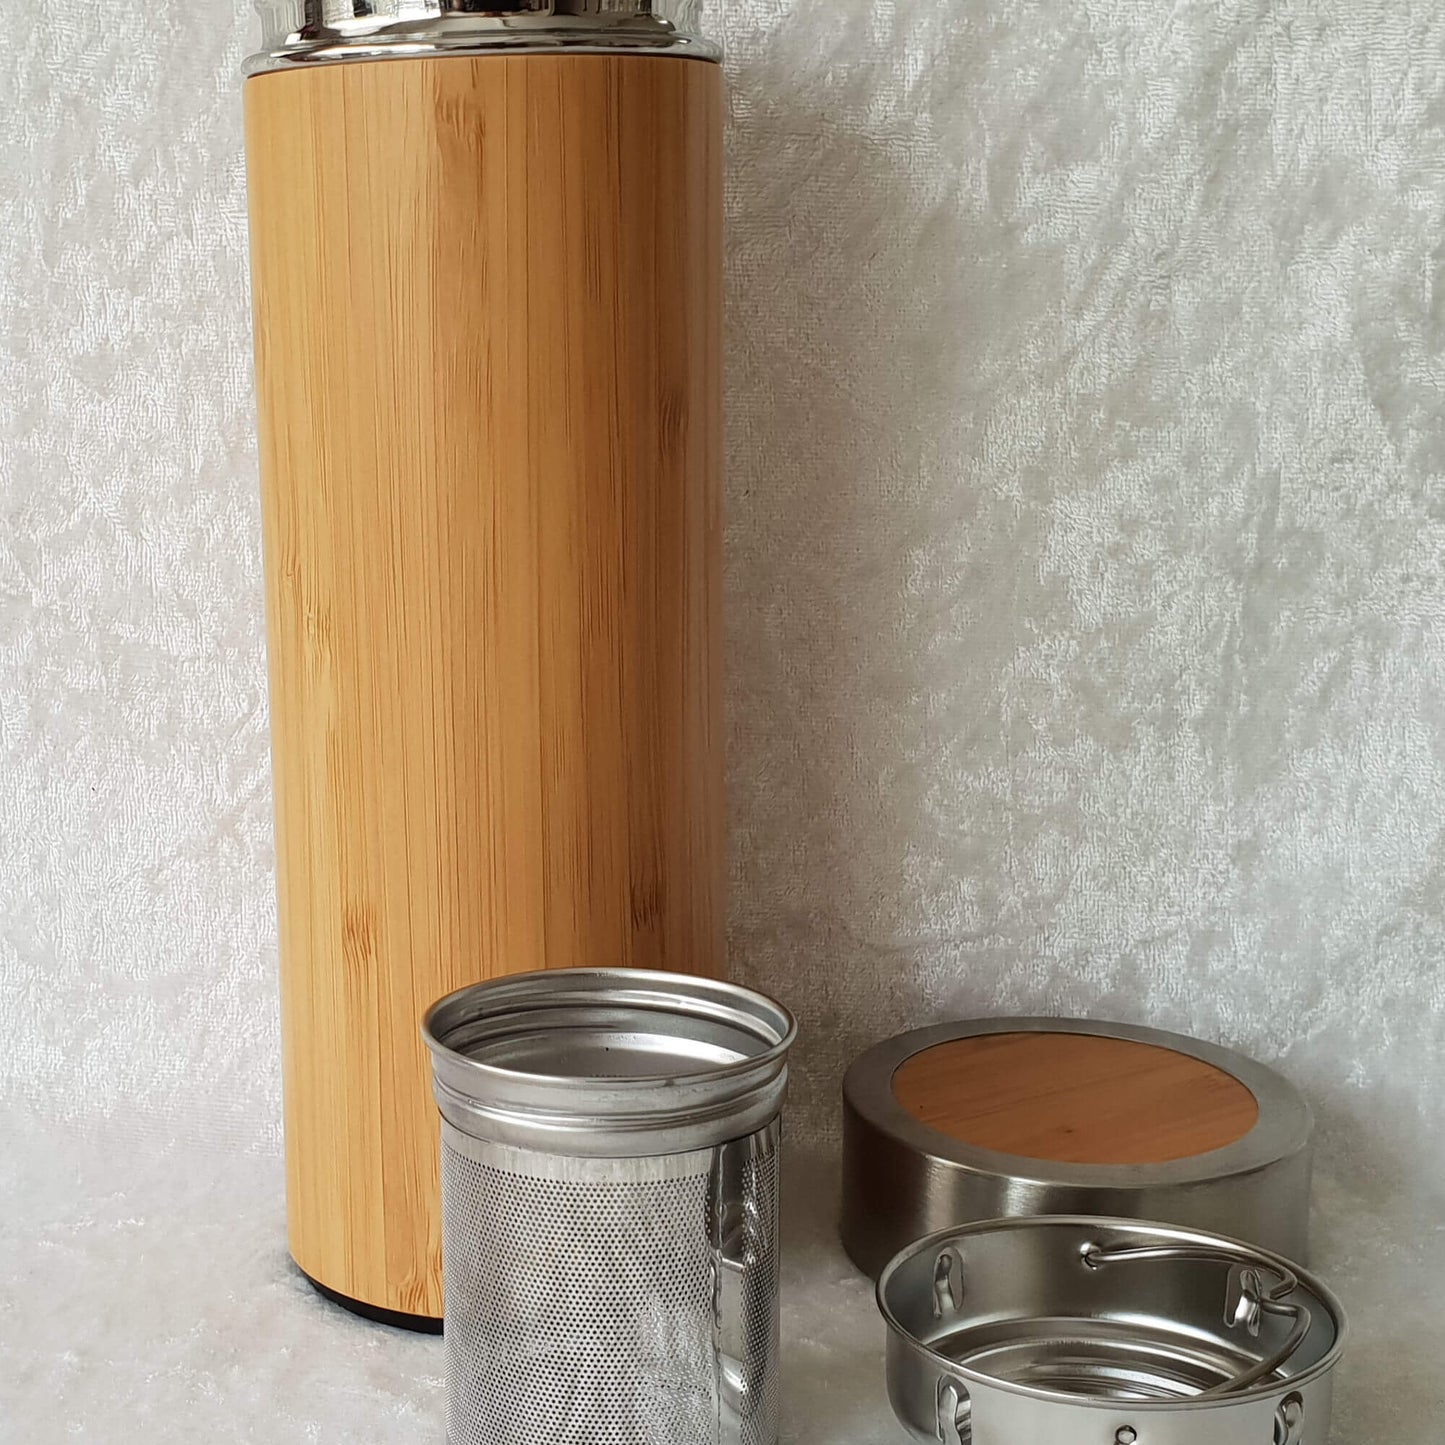 Tea infuser bottle Bamboo & Stainless Steel - Far North Plantations